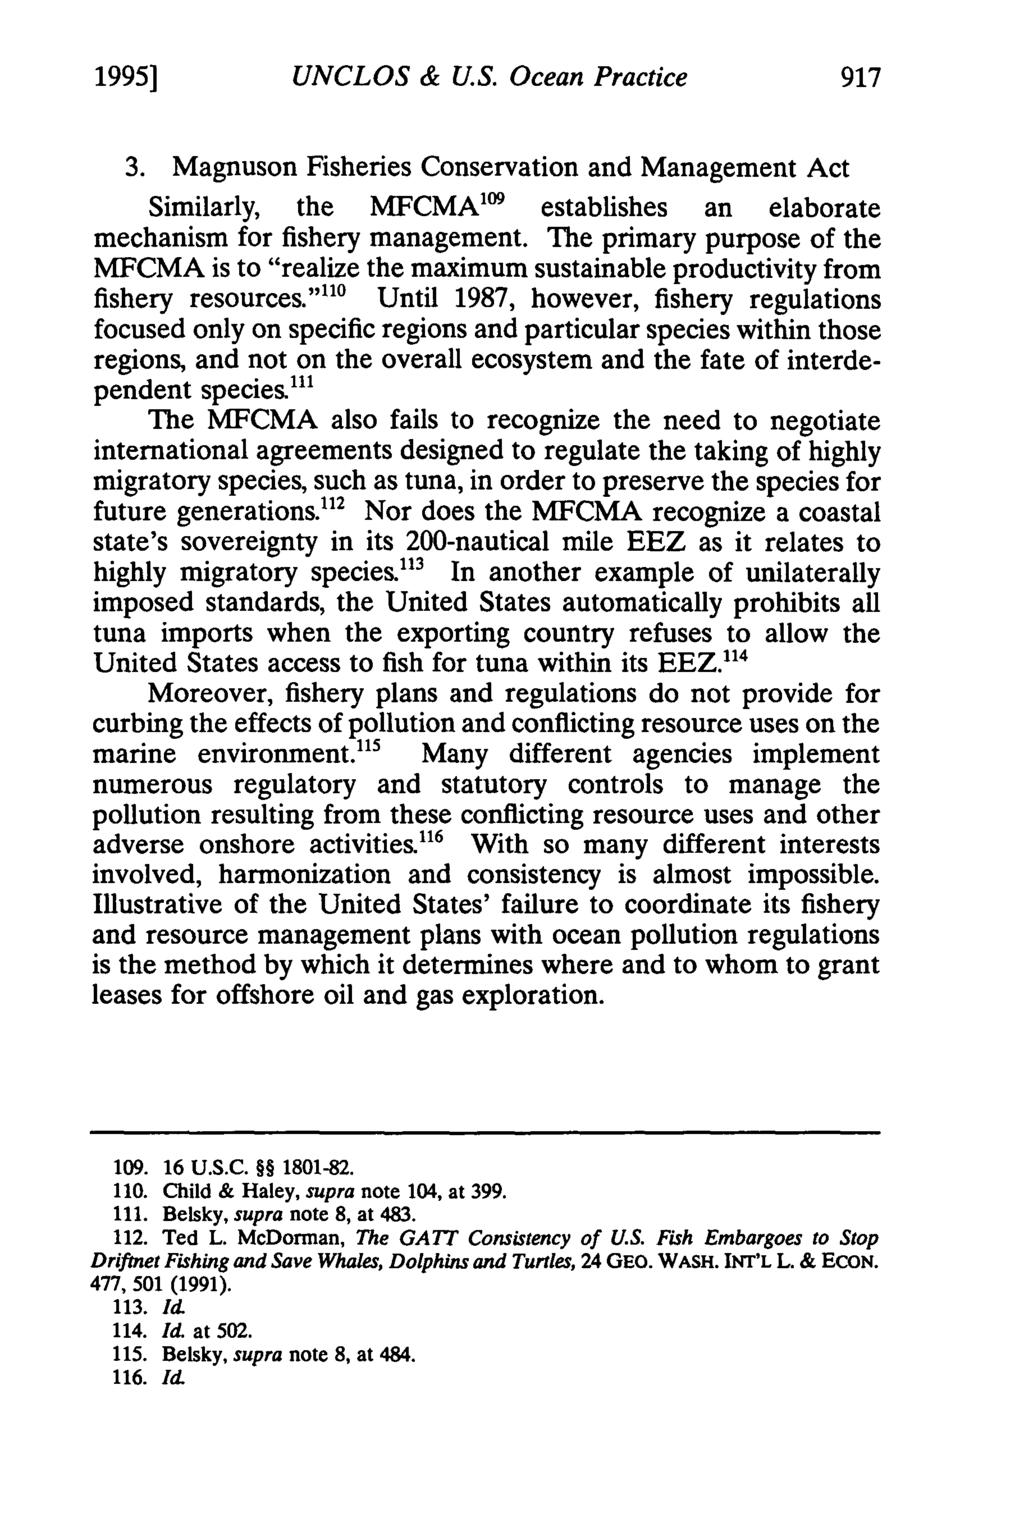 1995] UNCLOS & U.S. Ocean Practice 3. Magnuson Fisheries Conservation and Management Act Similarly, the MFCMA 1 9 establishes an elaborate mechanism for fishery management.